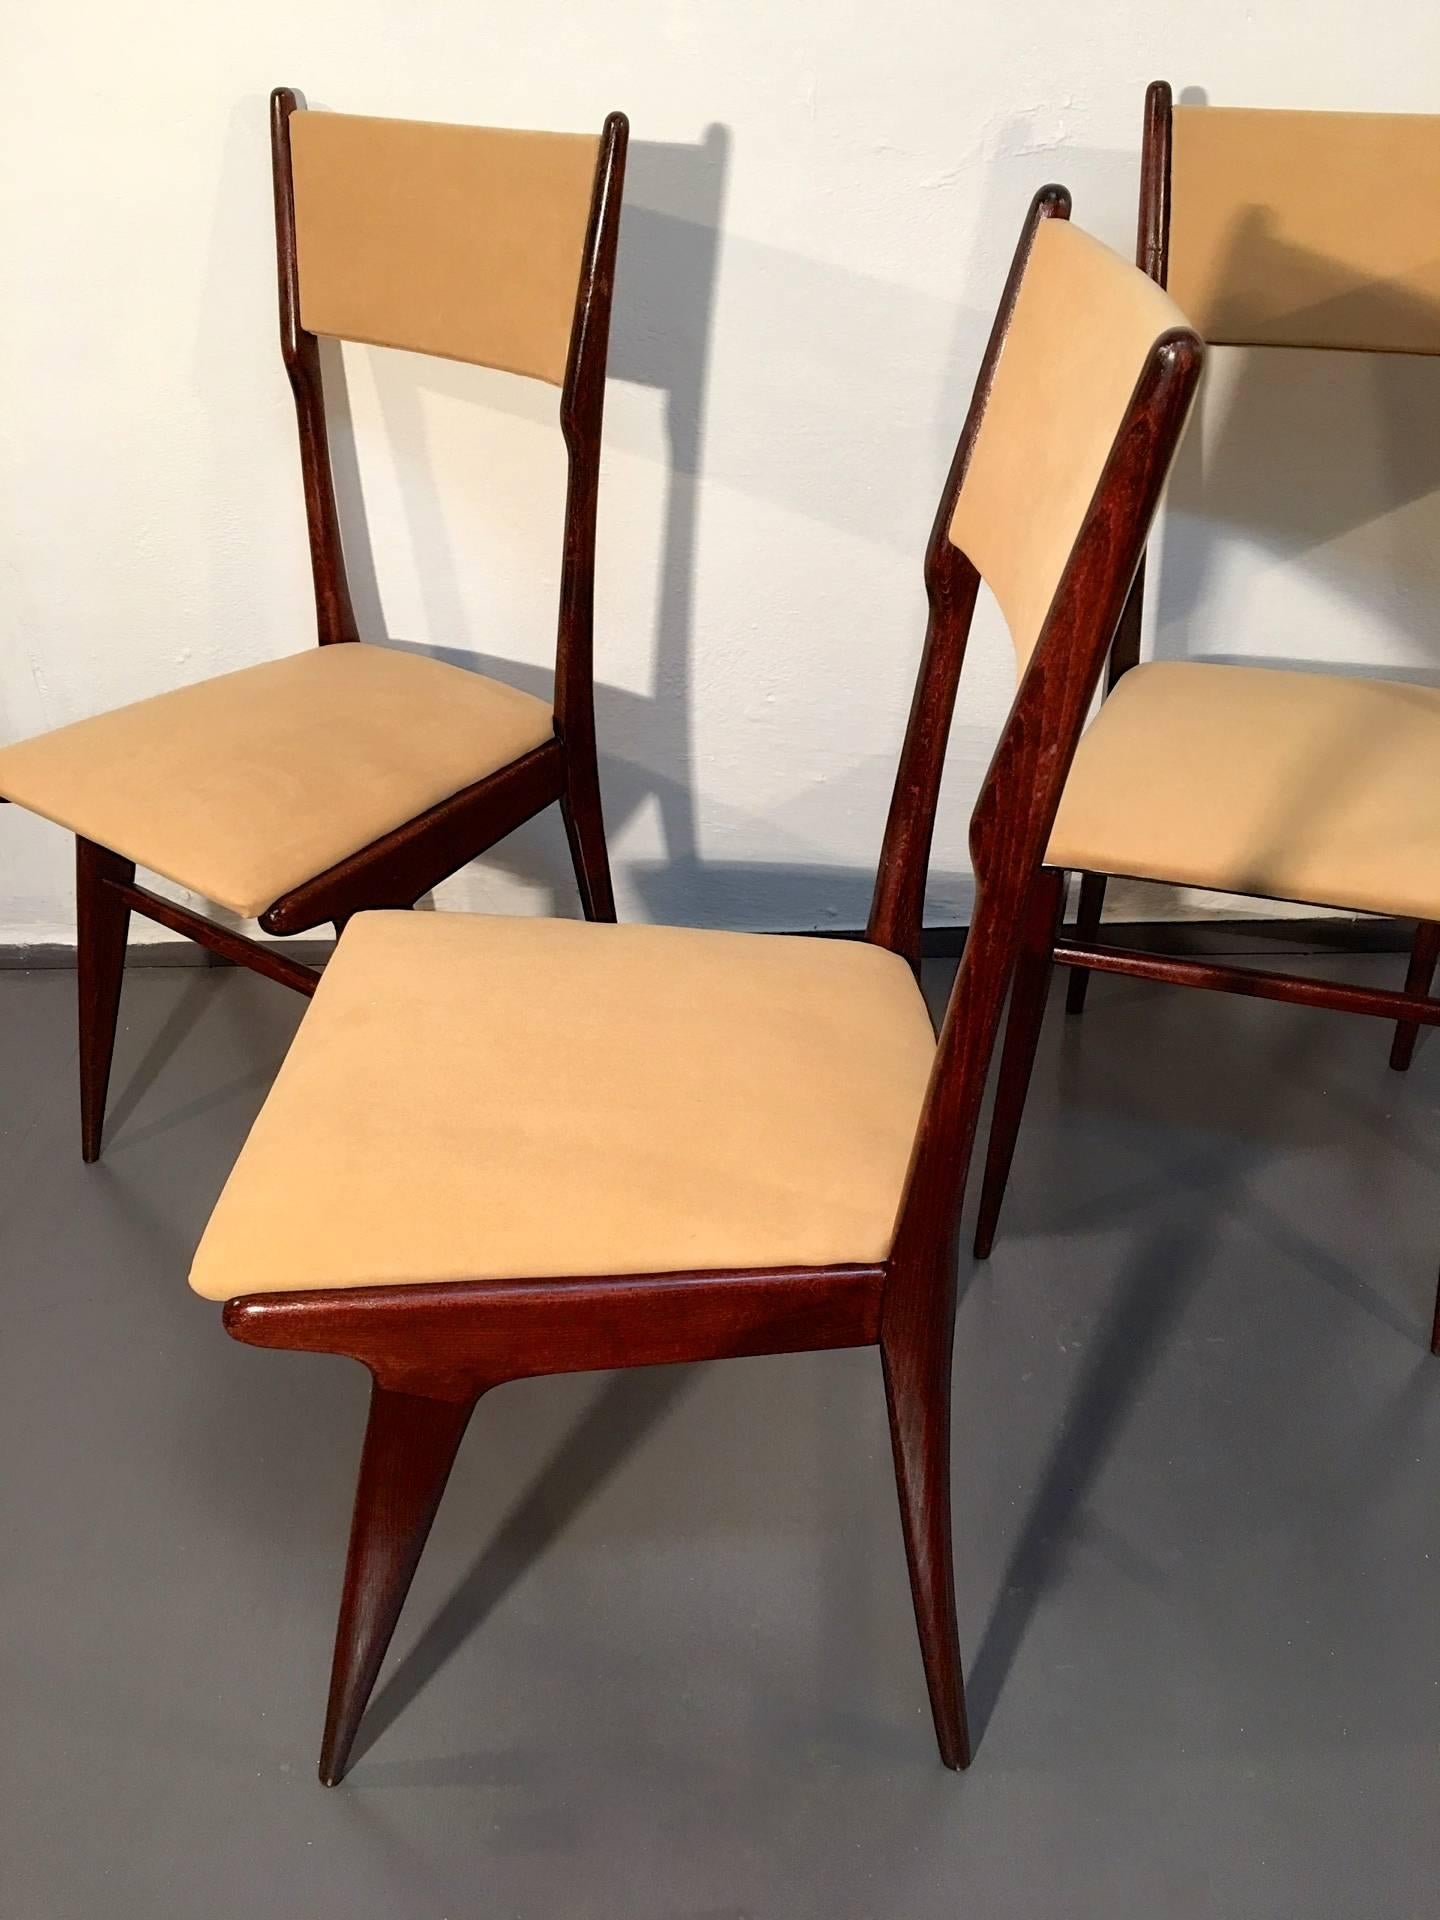 Italian Set of Four Chairs, Style of Carlo de Carli for Cassina, 1957 For Sale